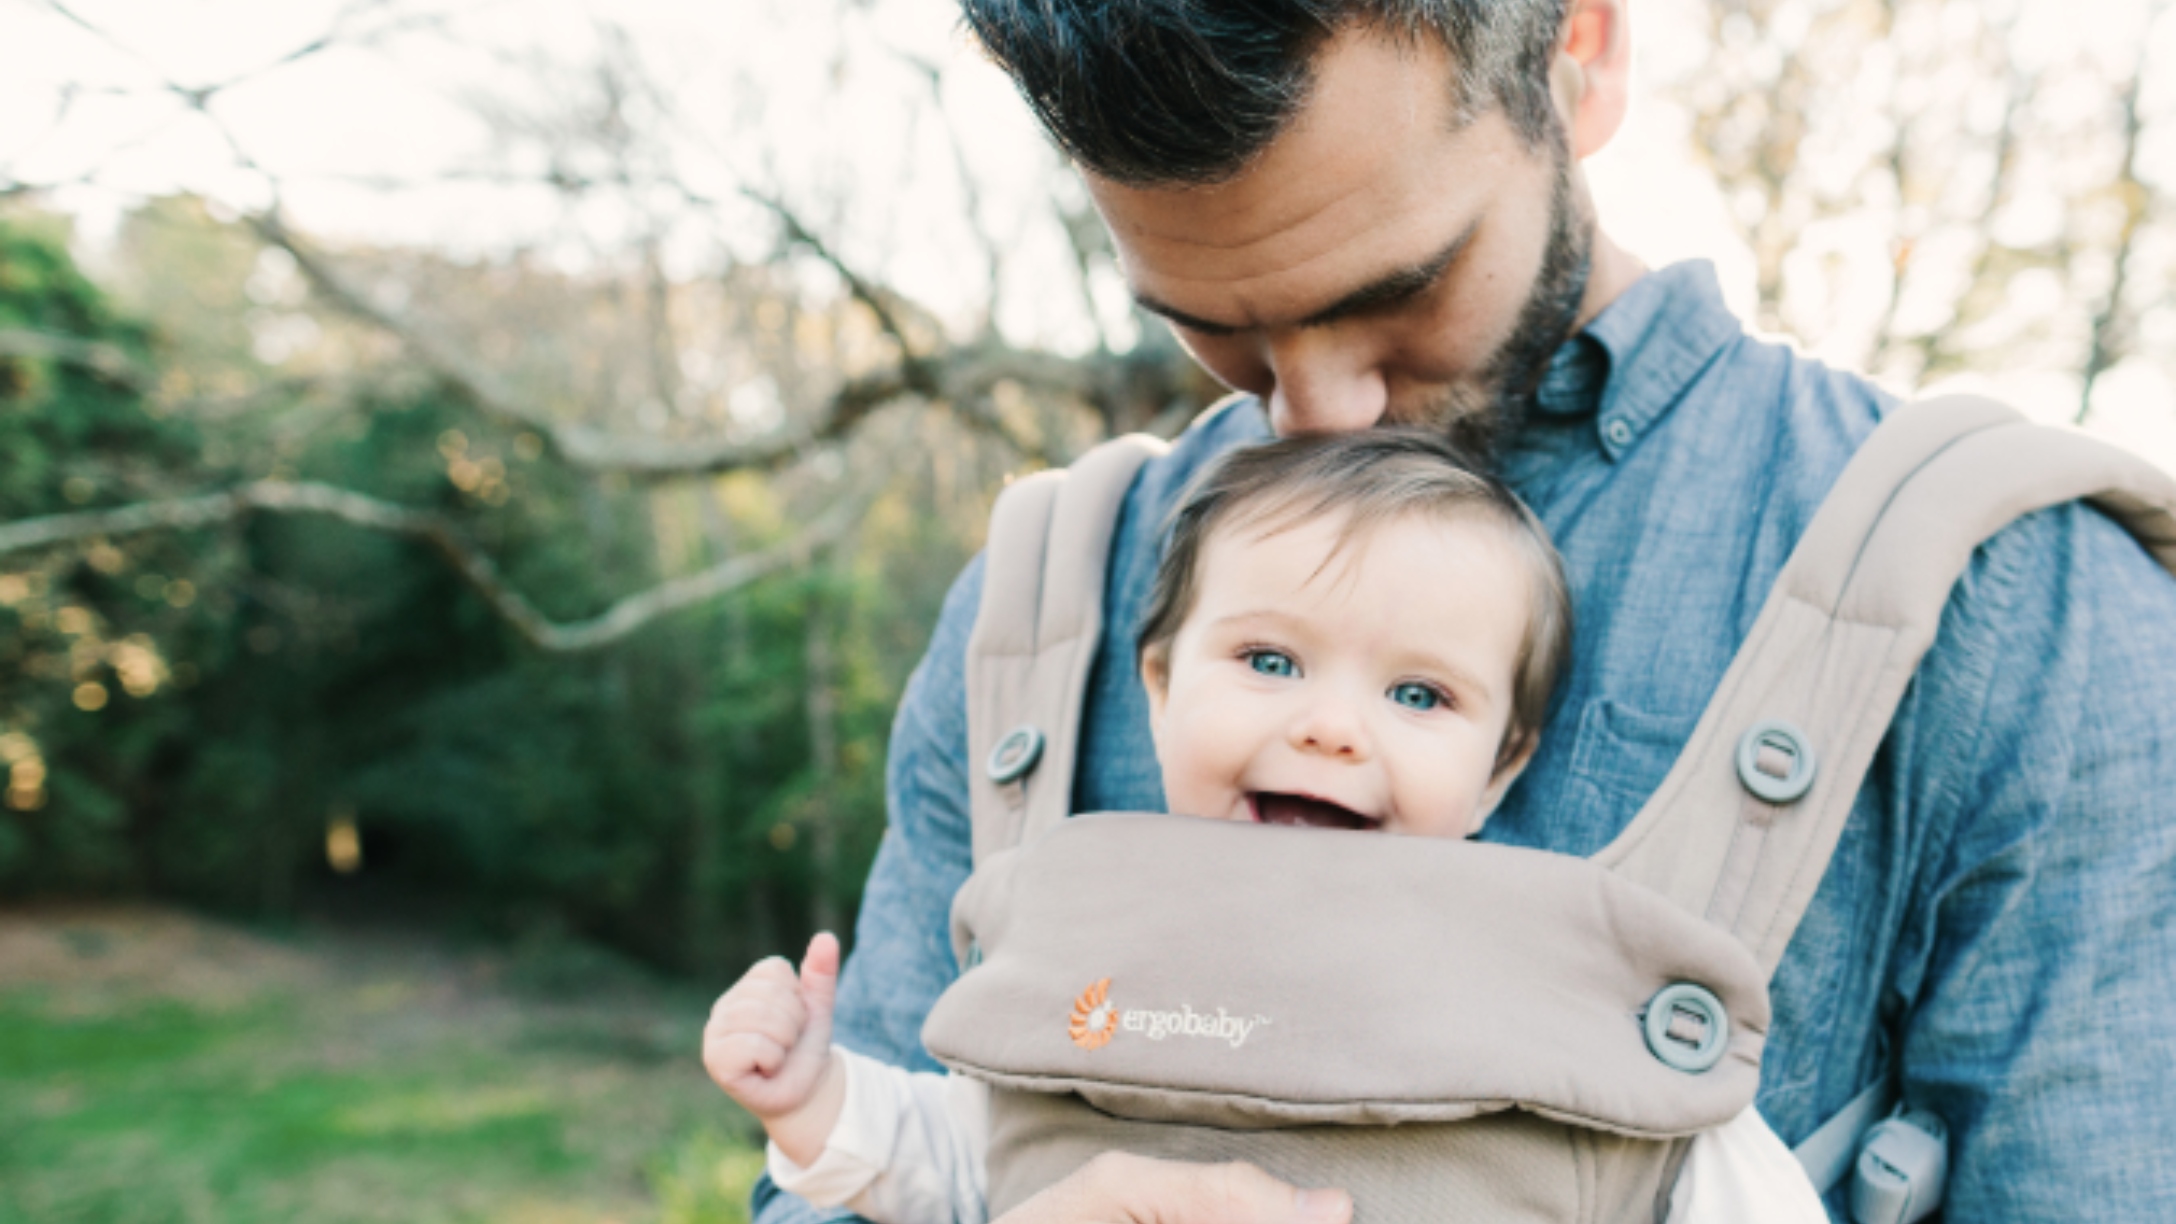 Ergobaby Launches Buy Back and Resale 